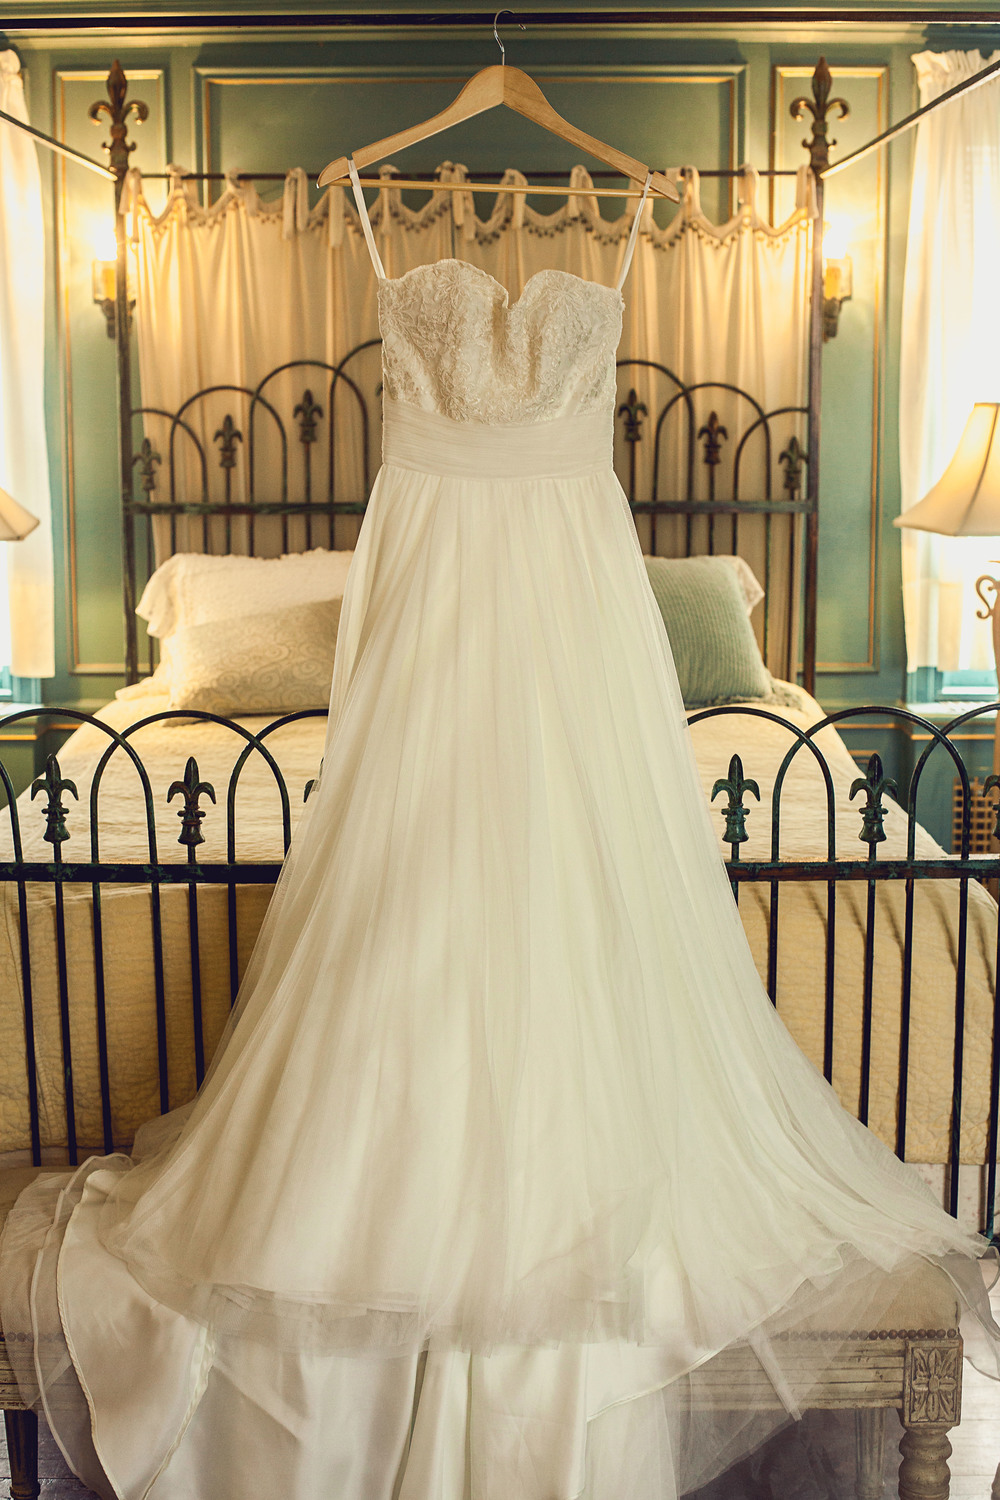   The Dress | #HisQueenHerEngelking Wedding | Photography by Two Arrows Photography at twoarrowsphoto.com  